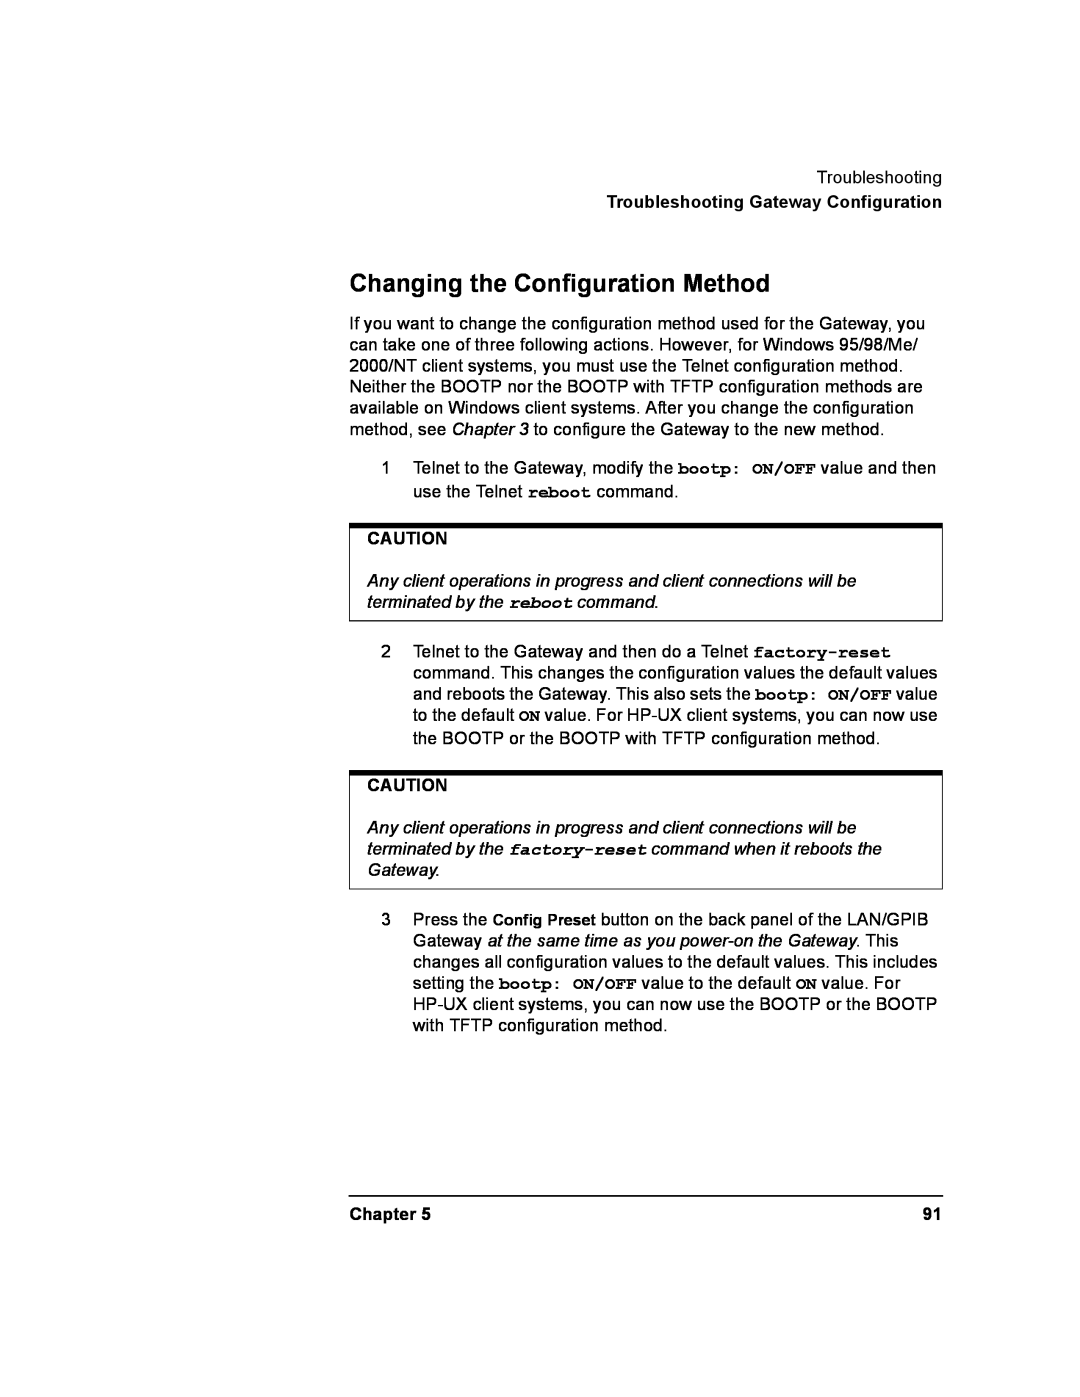 Agilent Technologies E2050-90003 manual Changing the Configuration Method, Troubleshooting Gateway Configuration, Chapter 